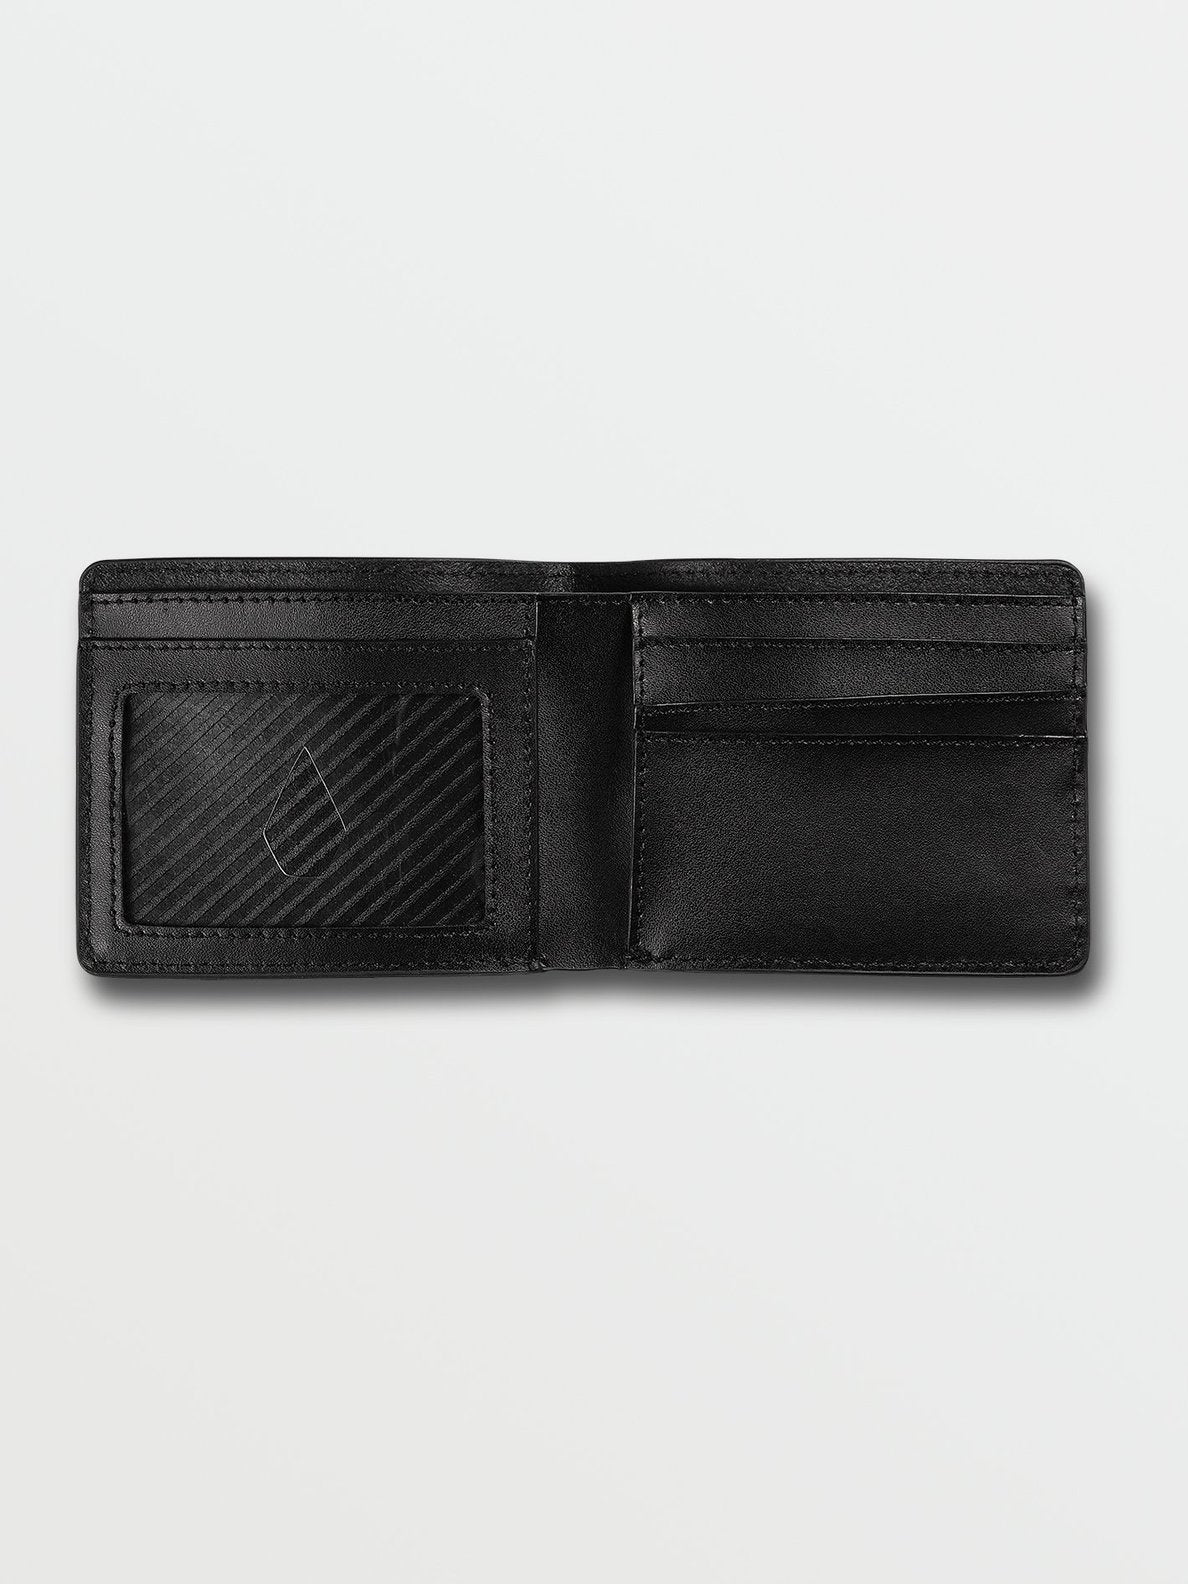 VOLCOM EVERS WALLET - BLACK freeshipping - FREESTYLE LLORET